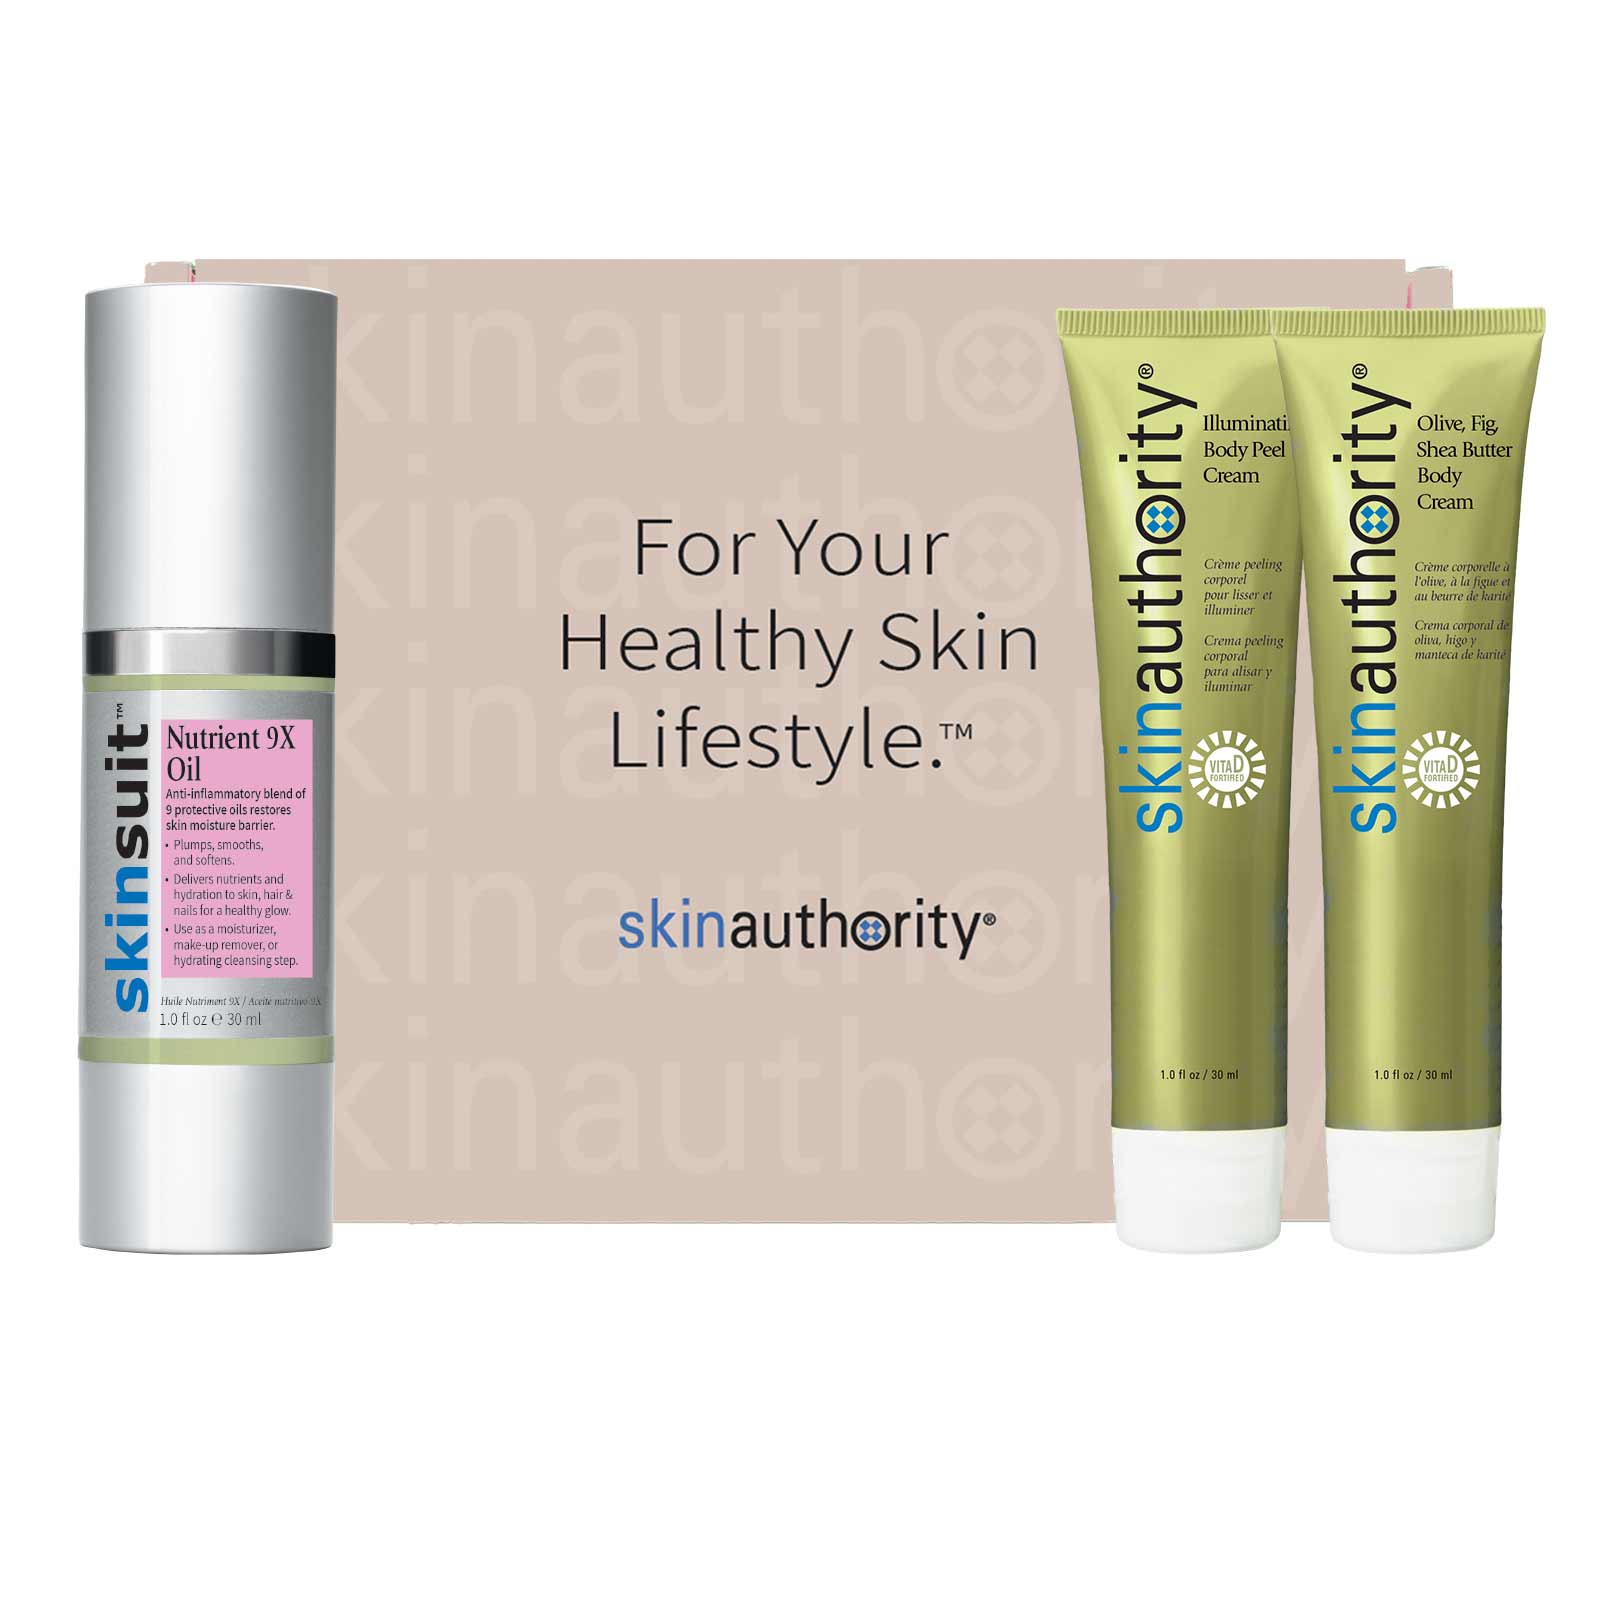 Skin Care Products for Healthy Skin